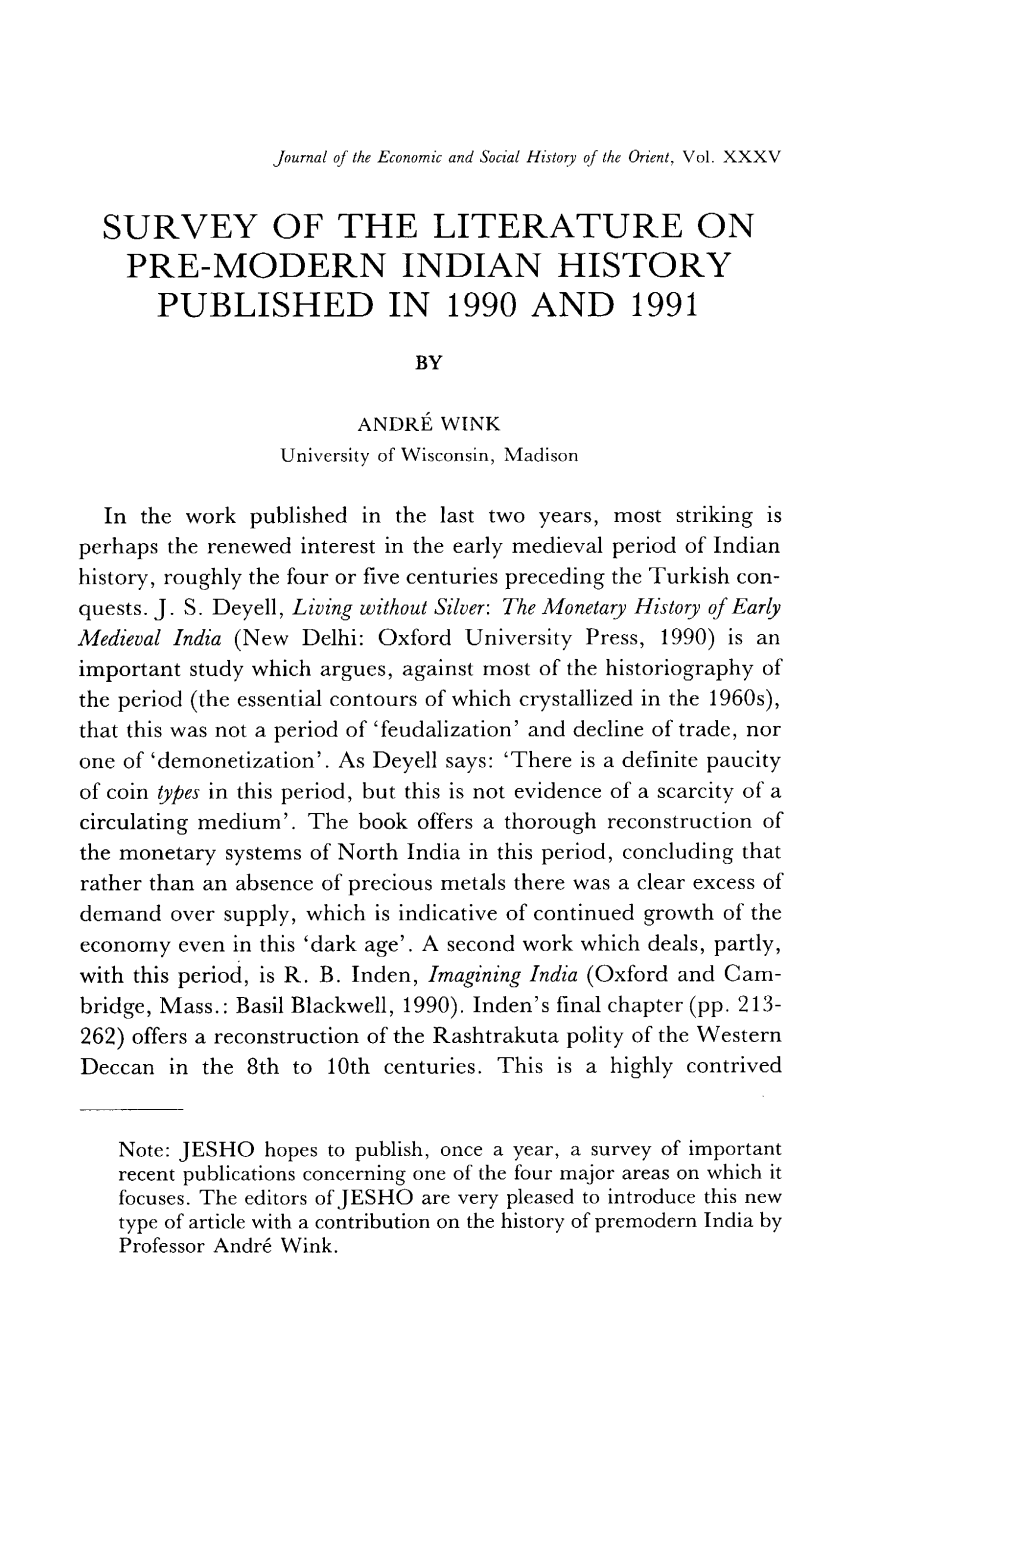 SURVEY of the LITERATURE on PRE-MODERN INDIAN HISTORY PUBLISHED in 1990 and 1991 by ANDRÉ WINK University of Wisconsin, Madison